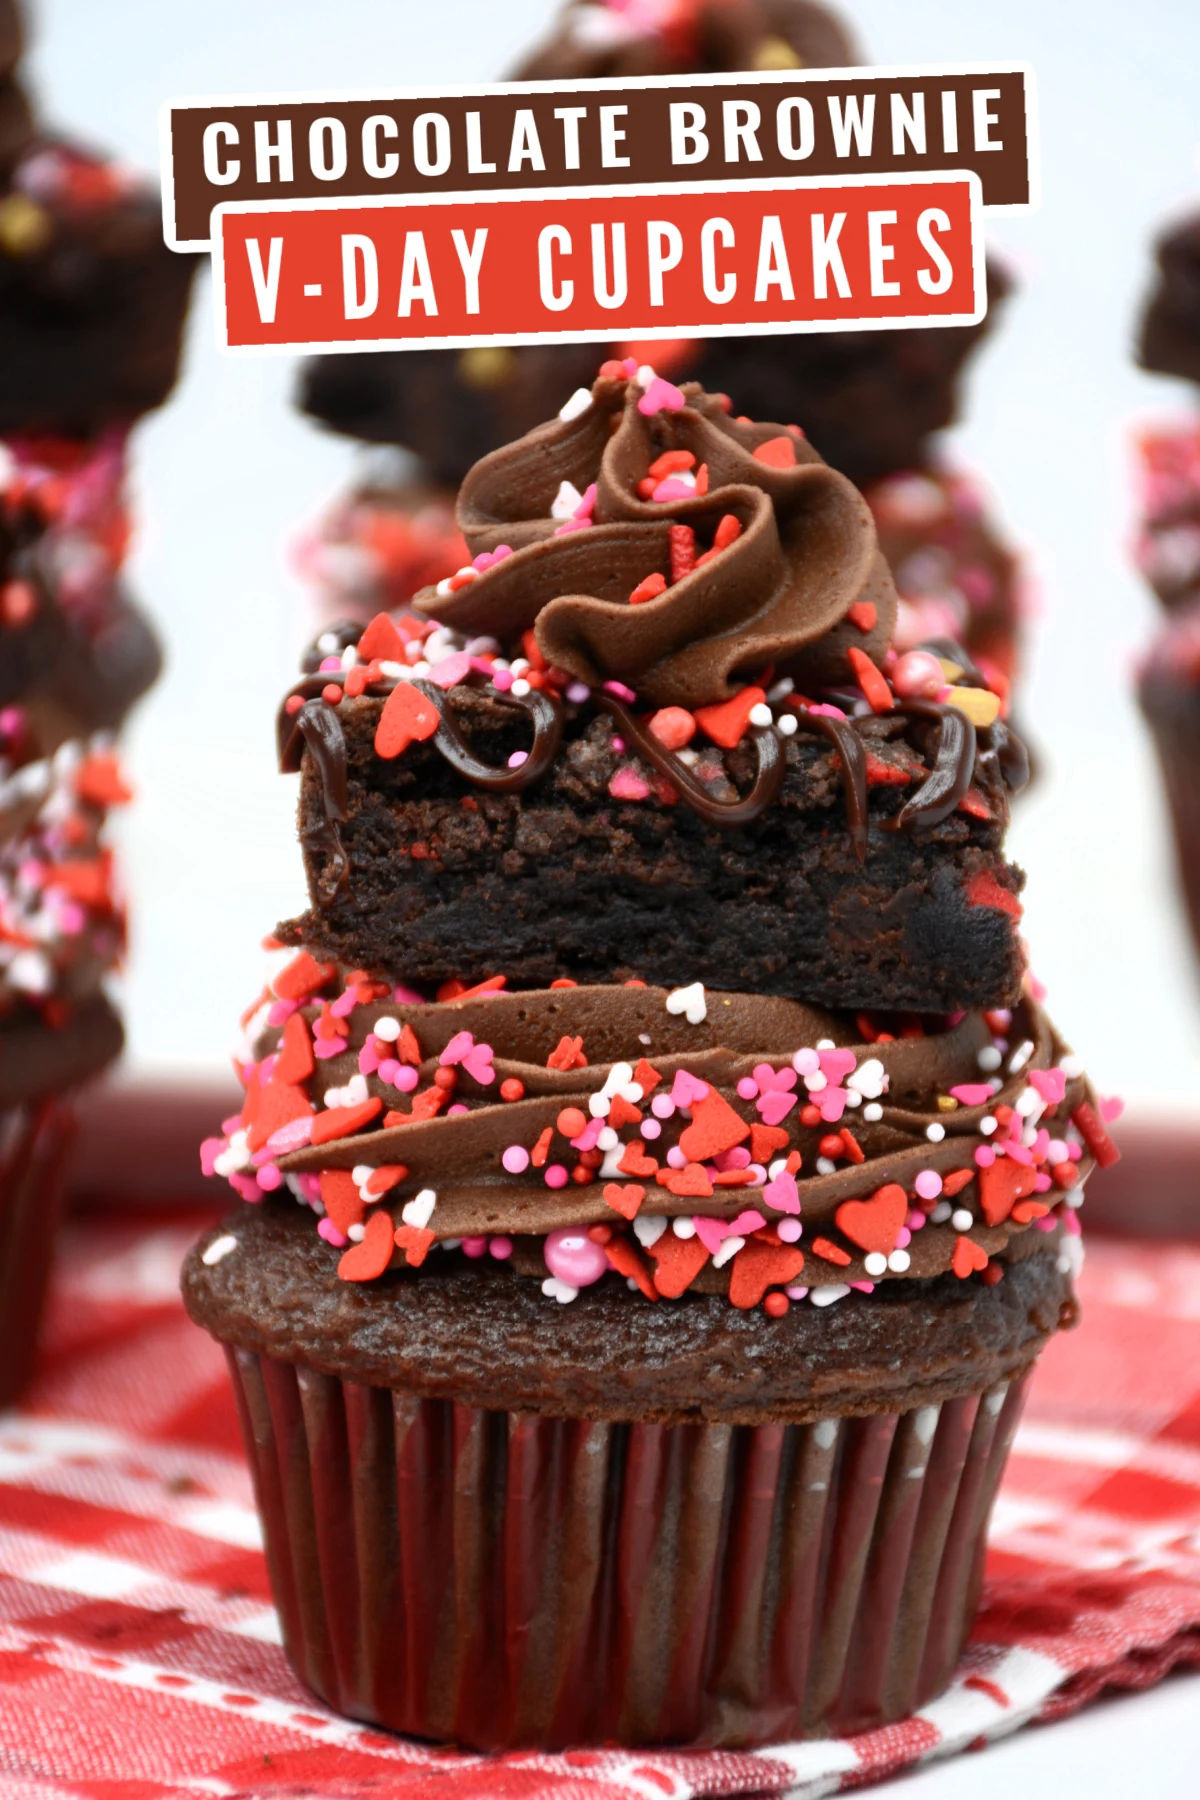 These over-the-top, delicious chocolate brownie Valentine's Day cupcakes are the perfect way to show your loved ones how much you care!